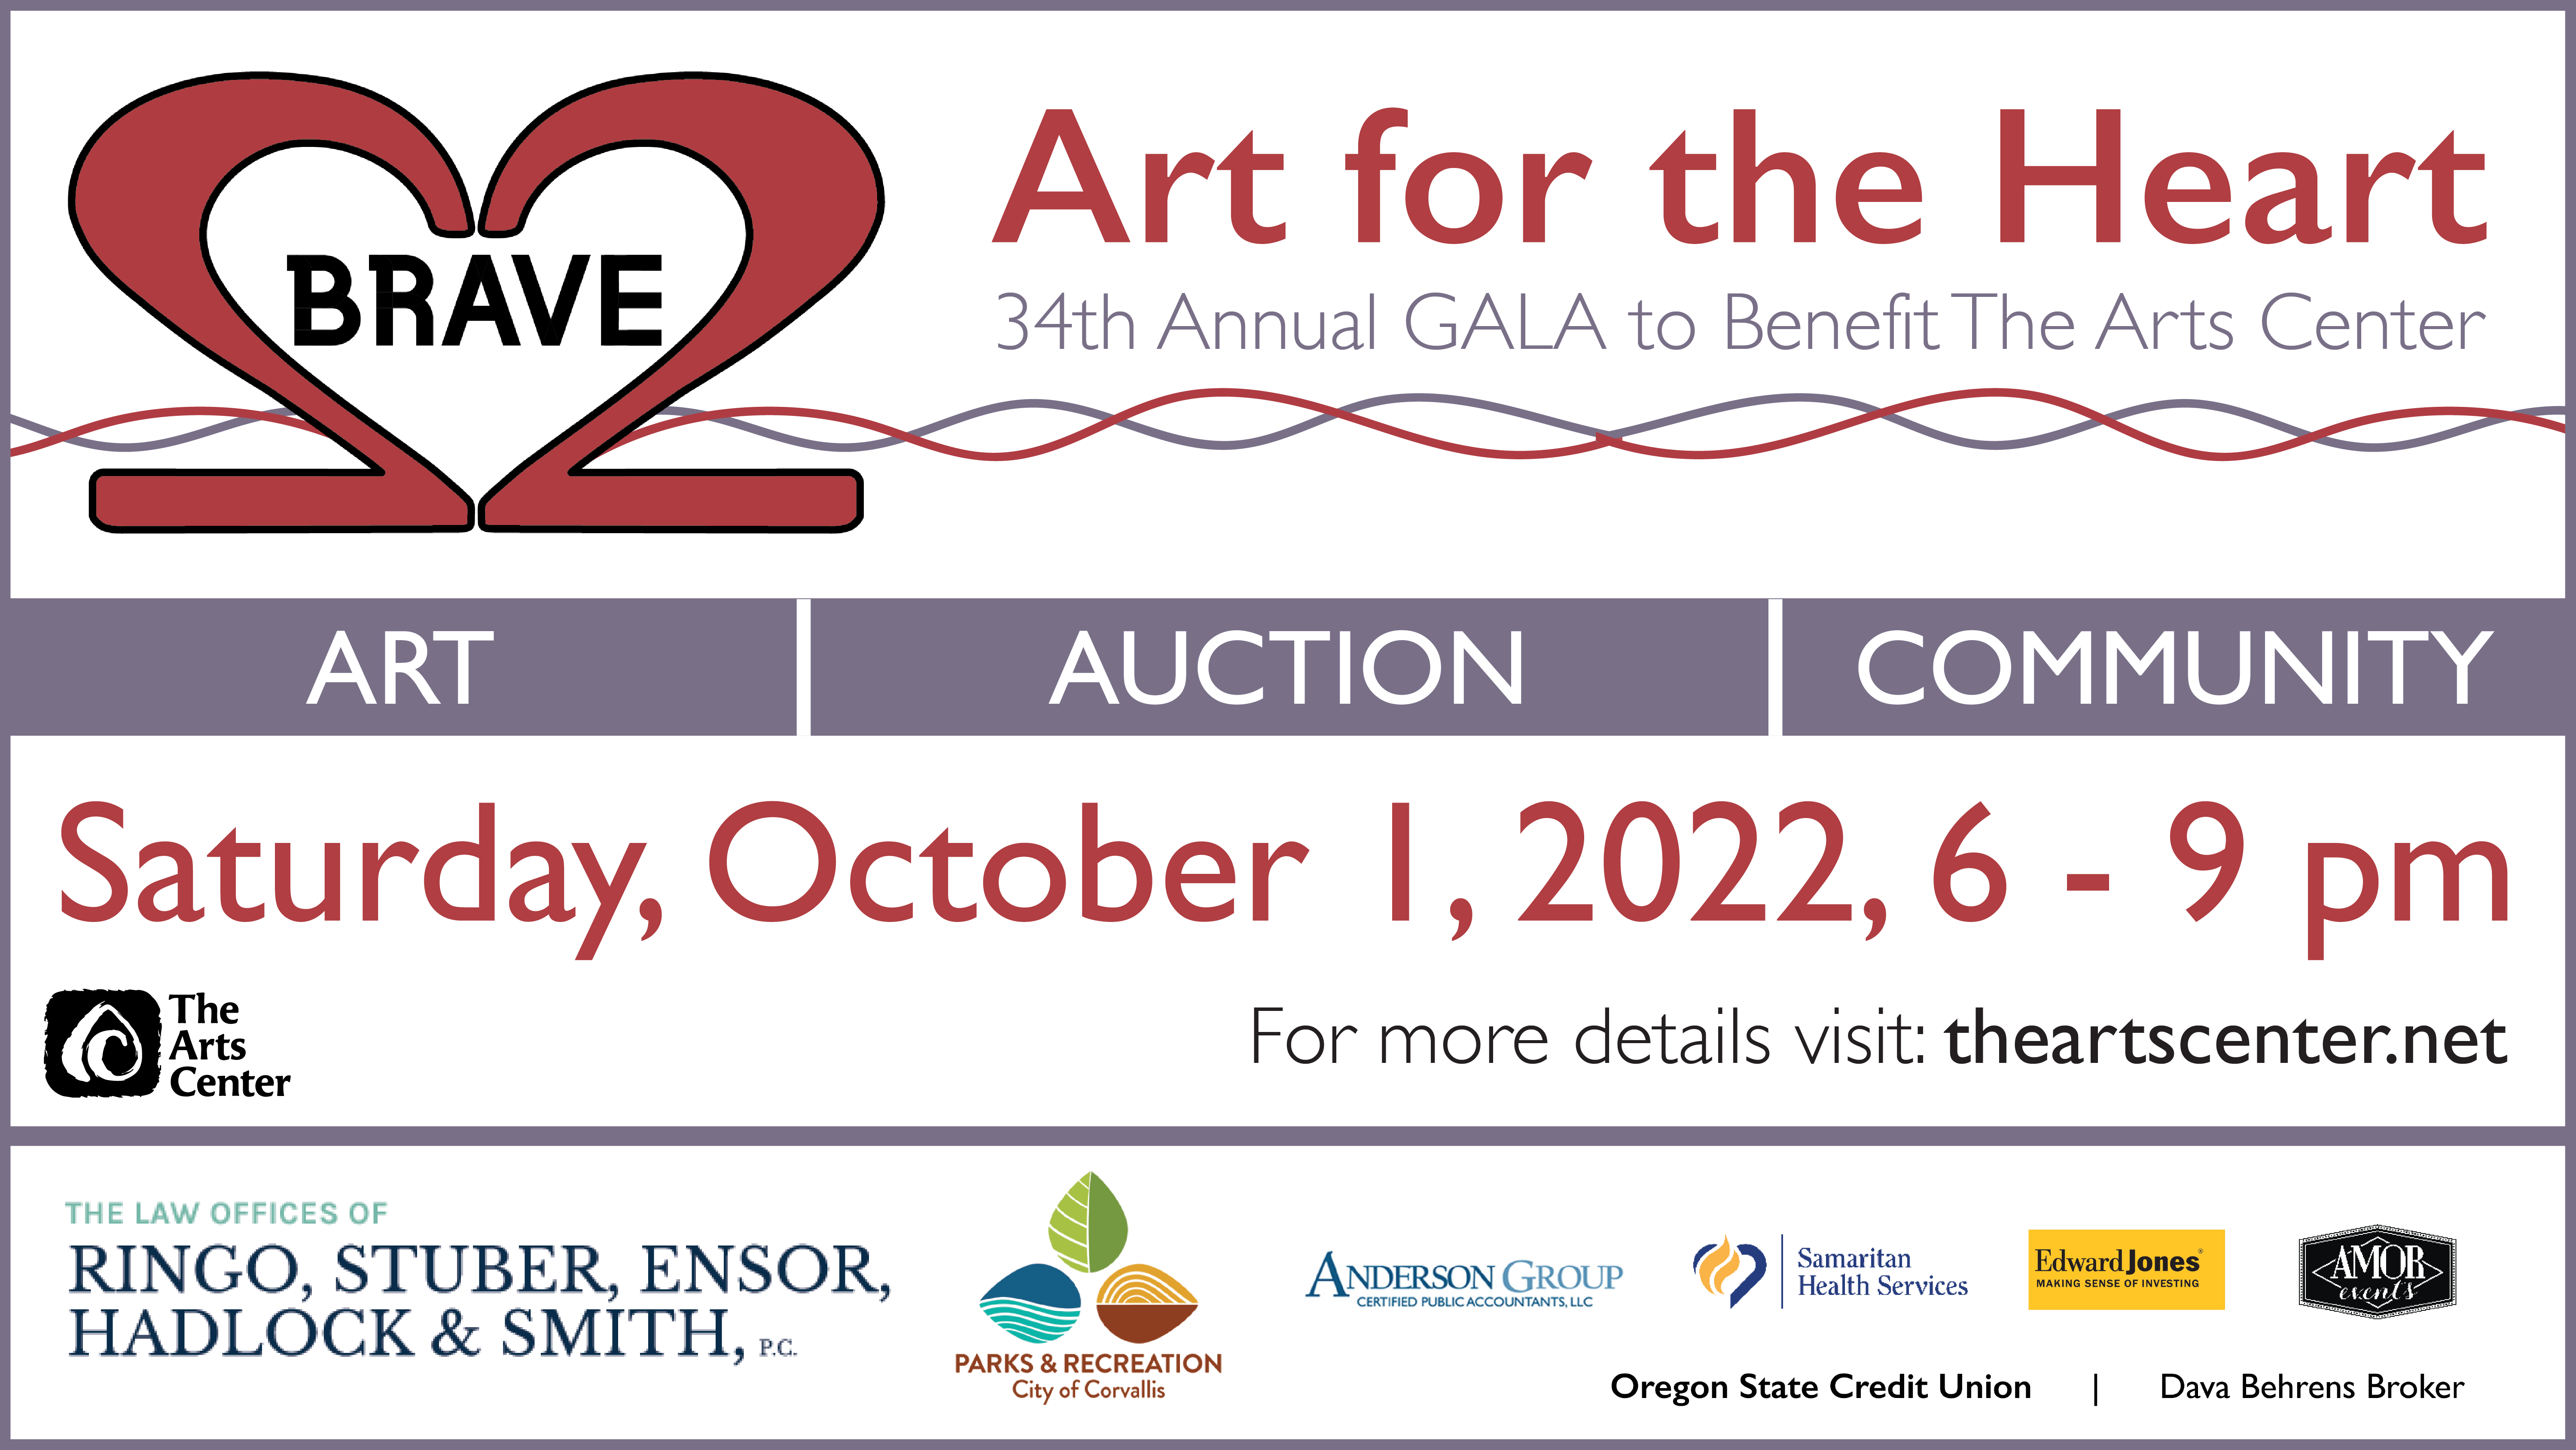 Art for the Heart Graphic for Fundraising Event